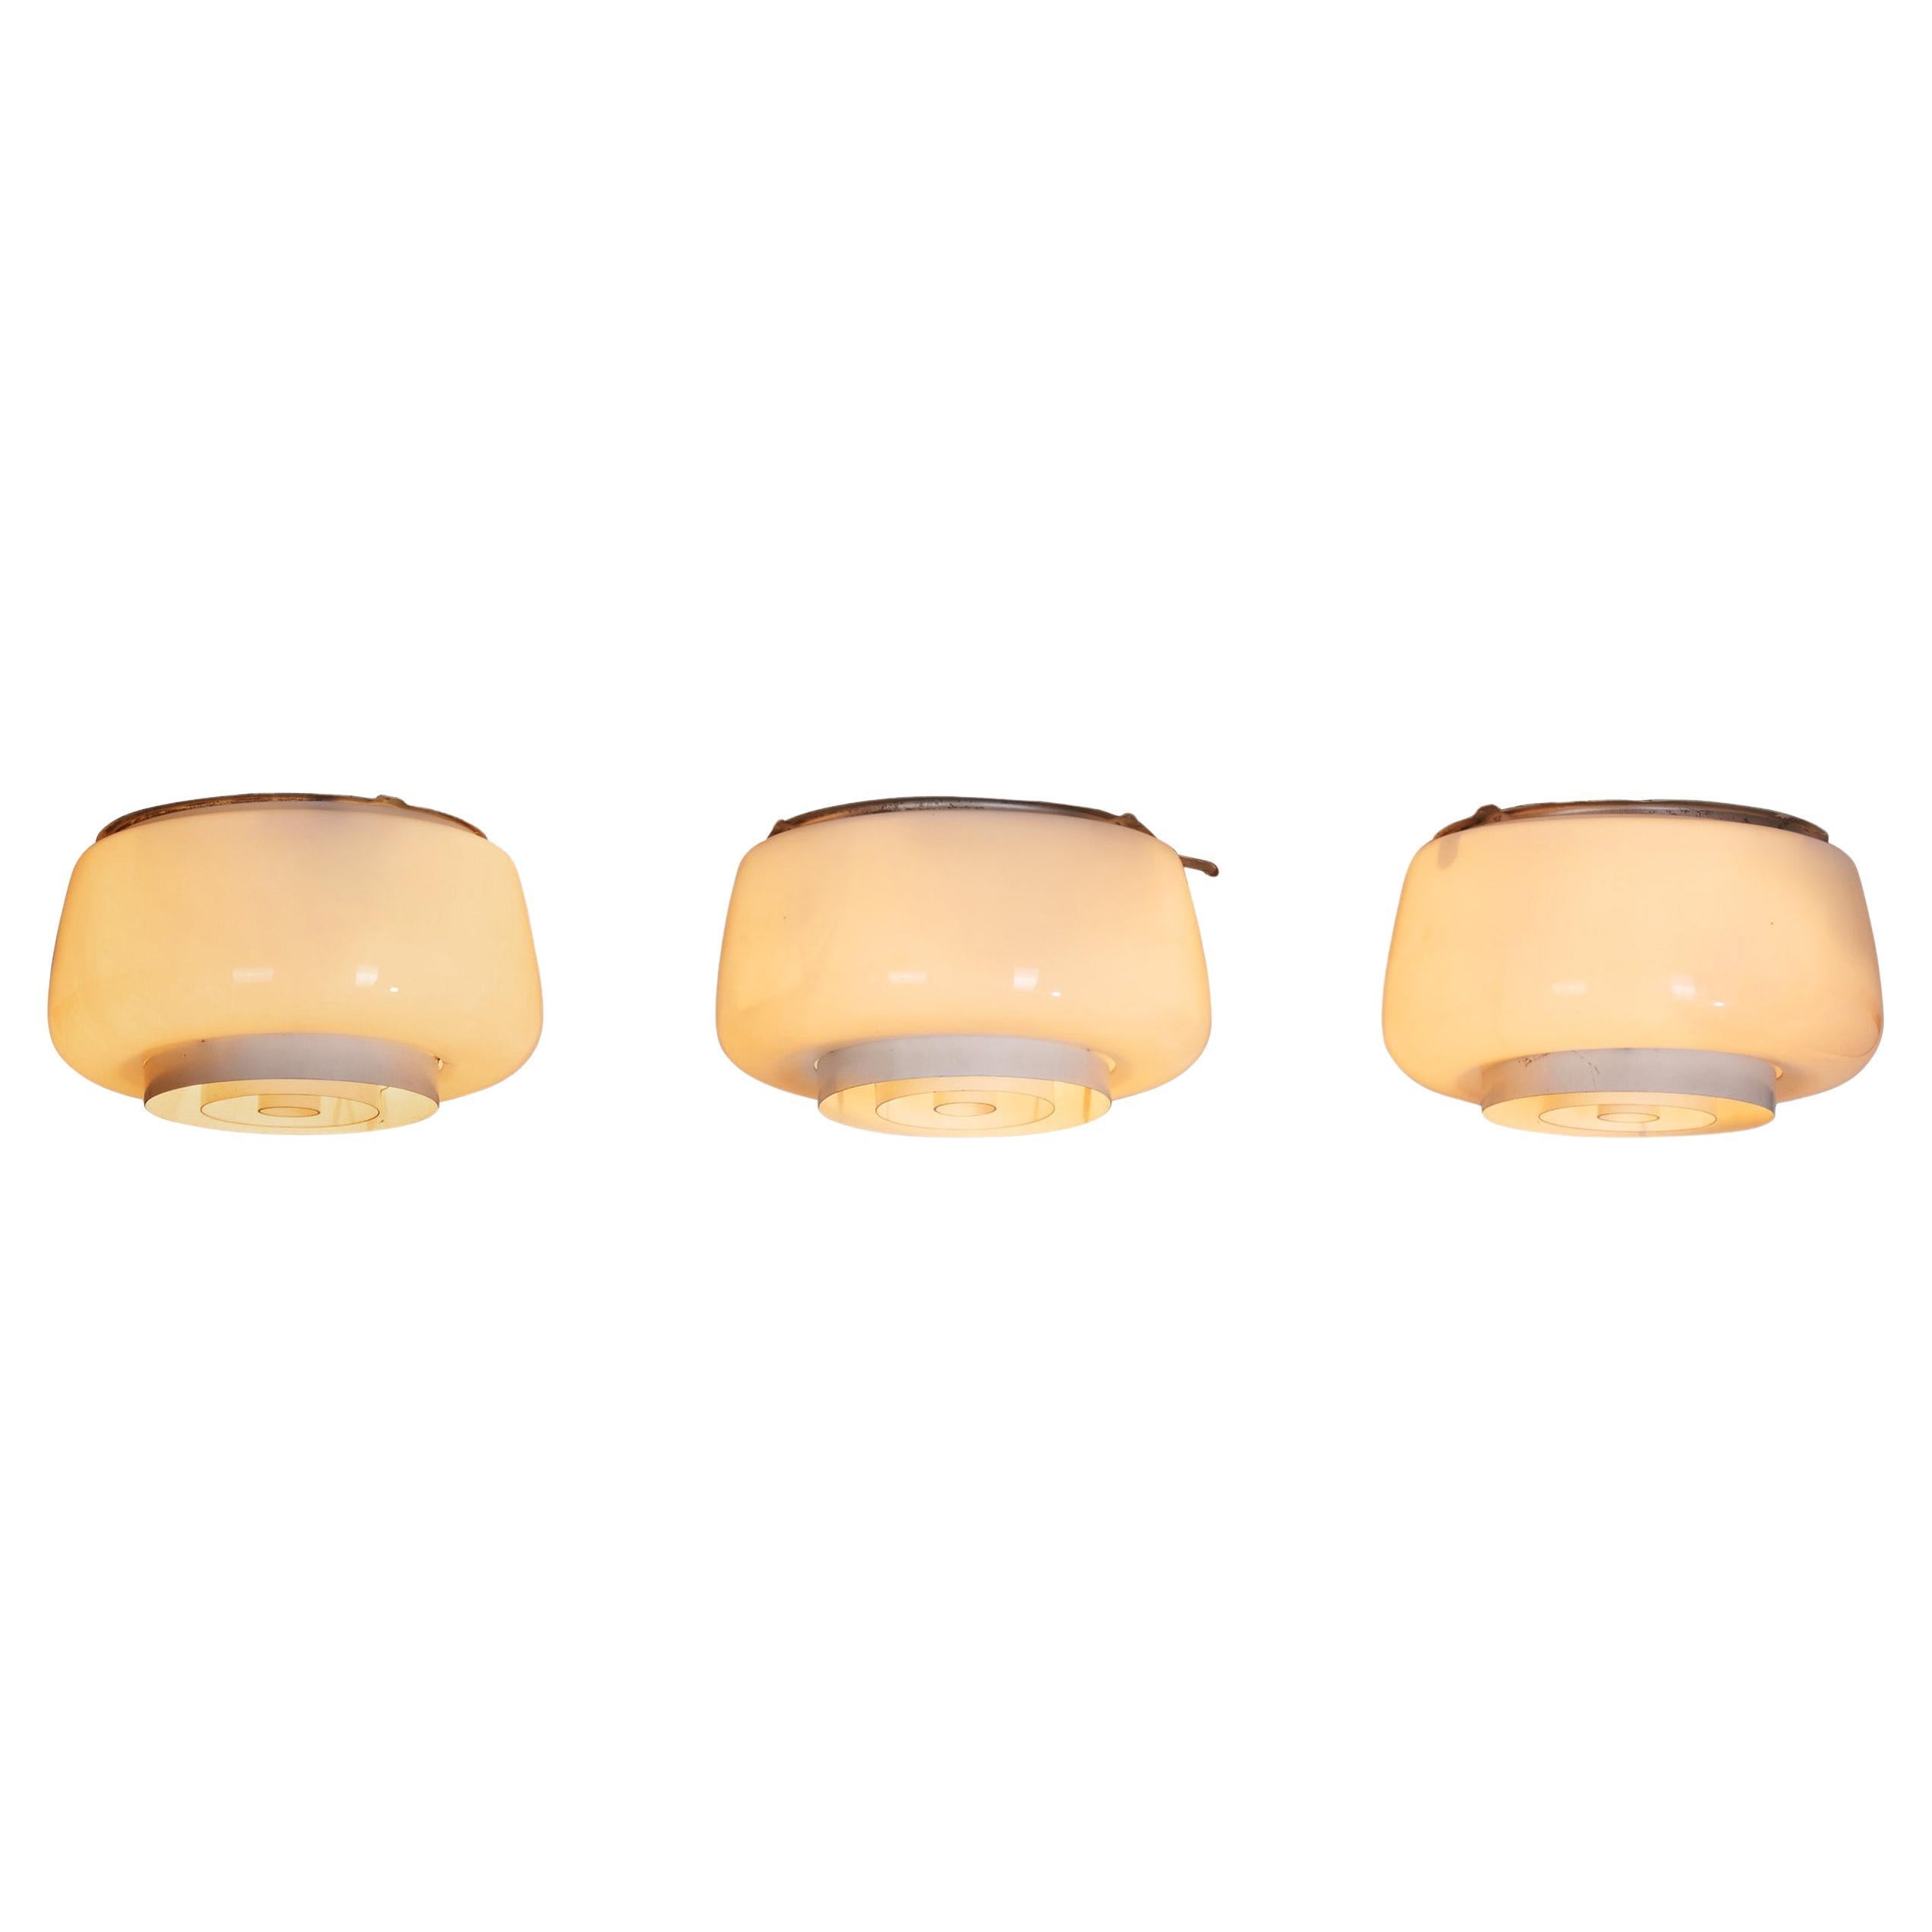 Three Paavo Tynell "A2-8" Opal Glass Ceiling Lights for Idman, Finland 1960s